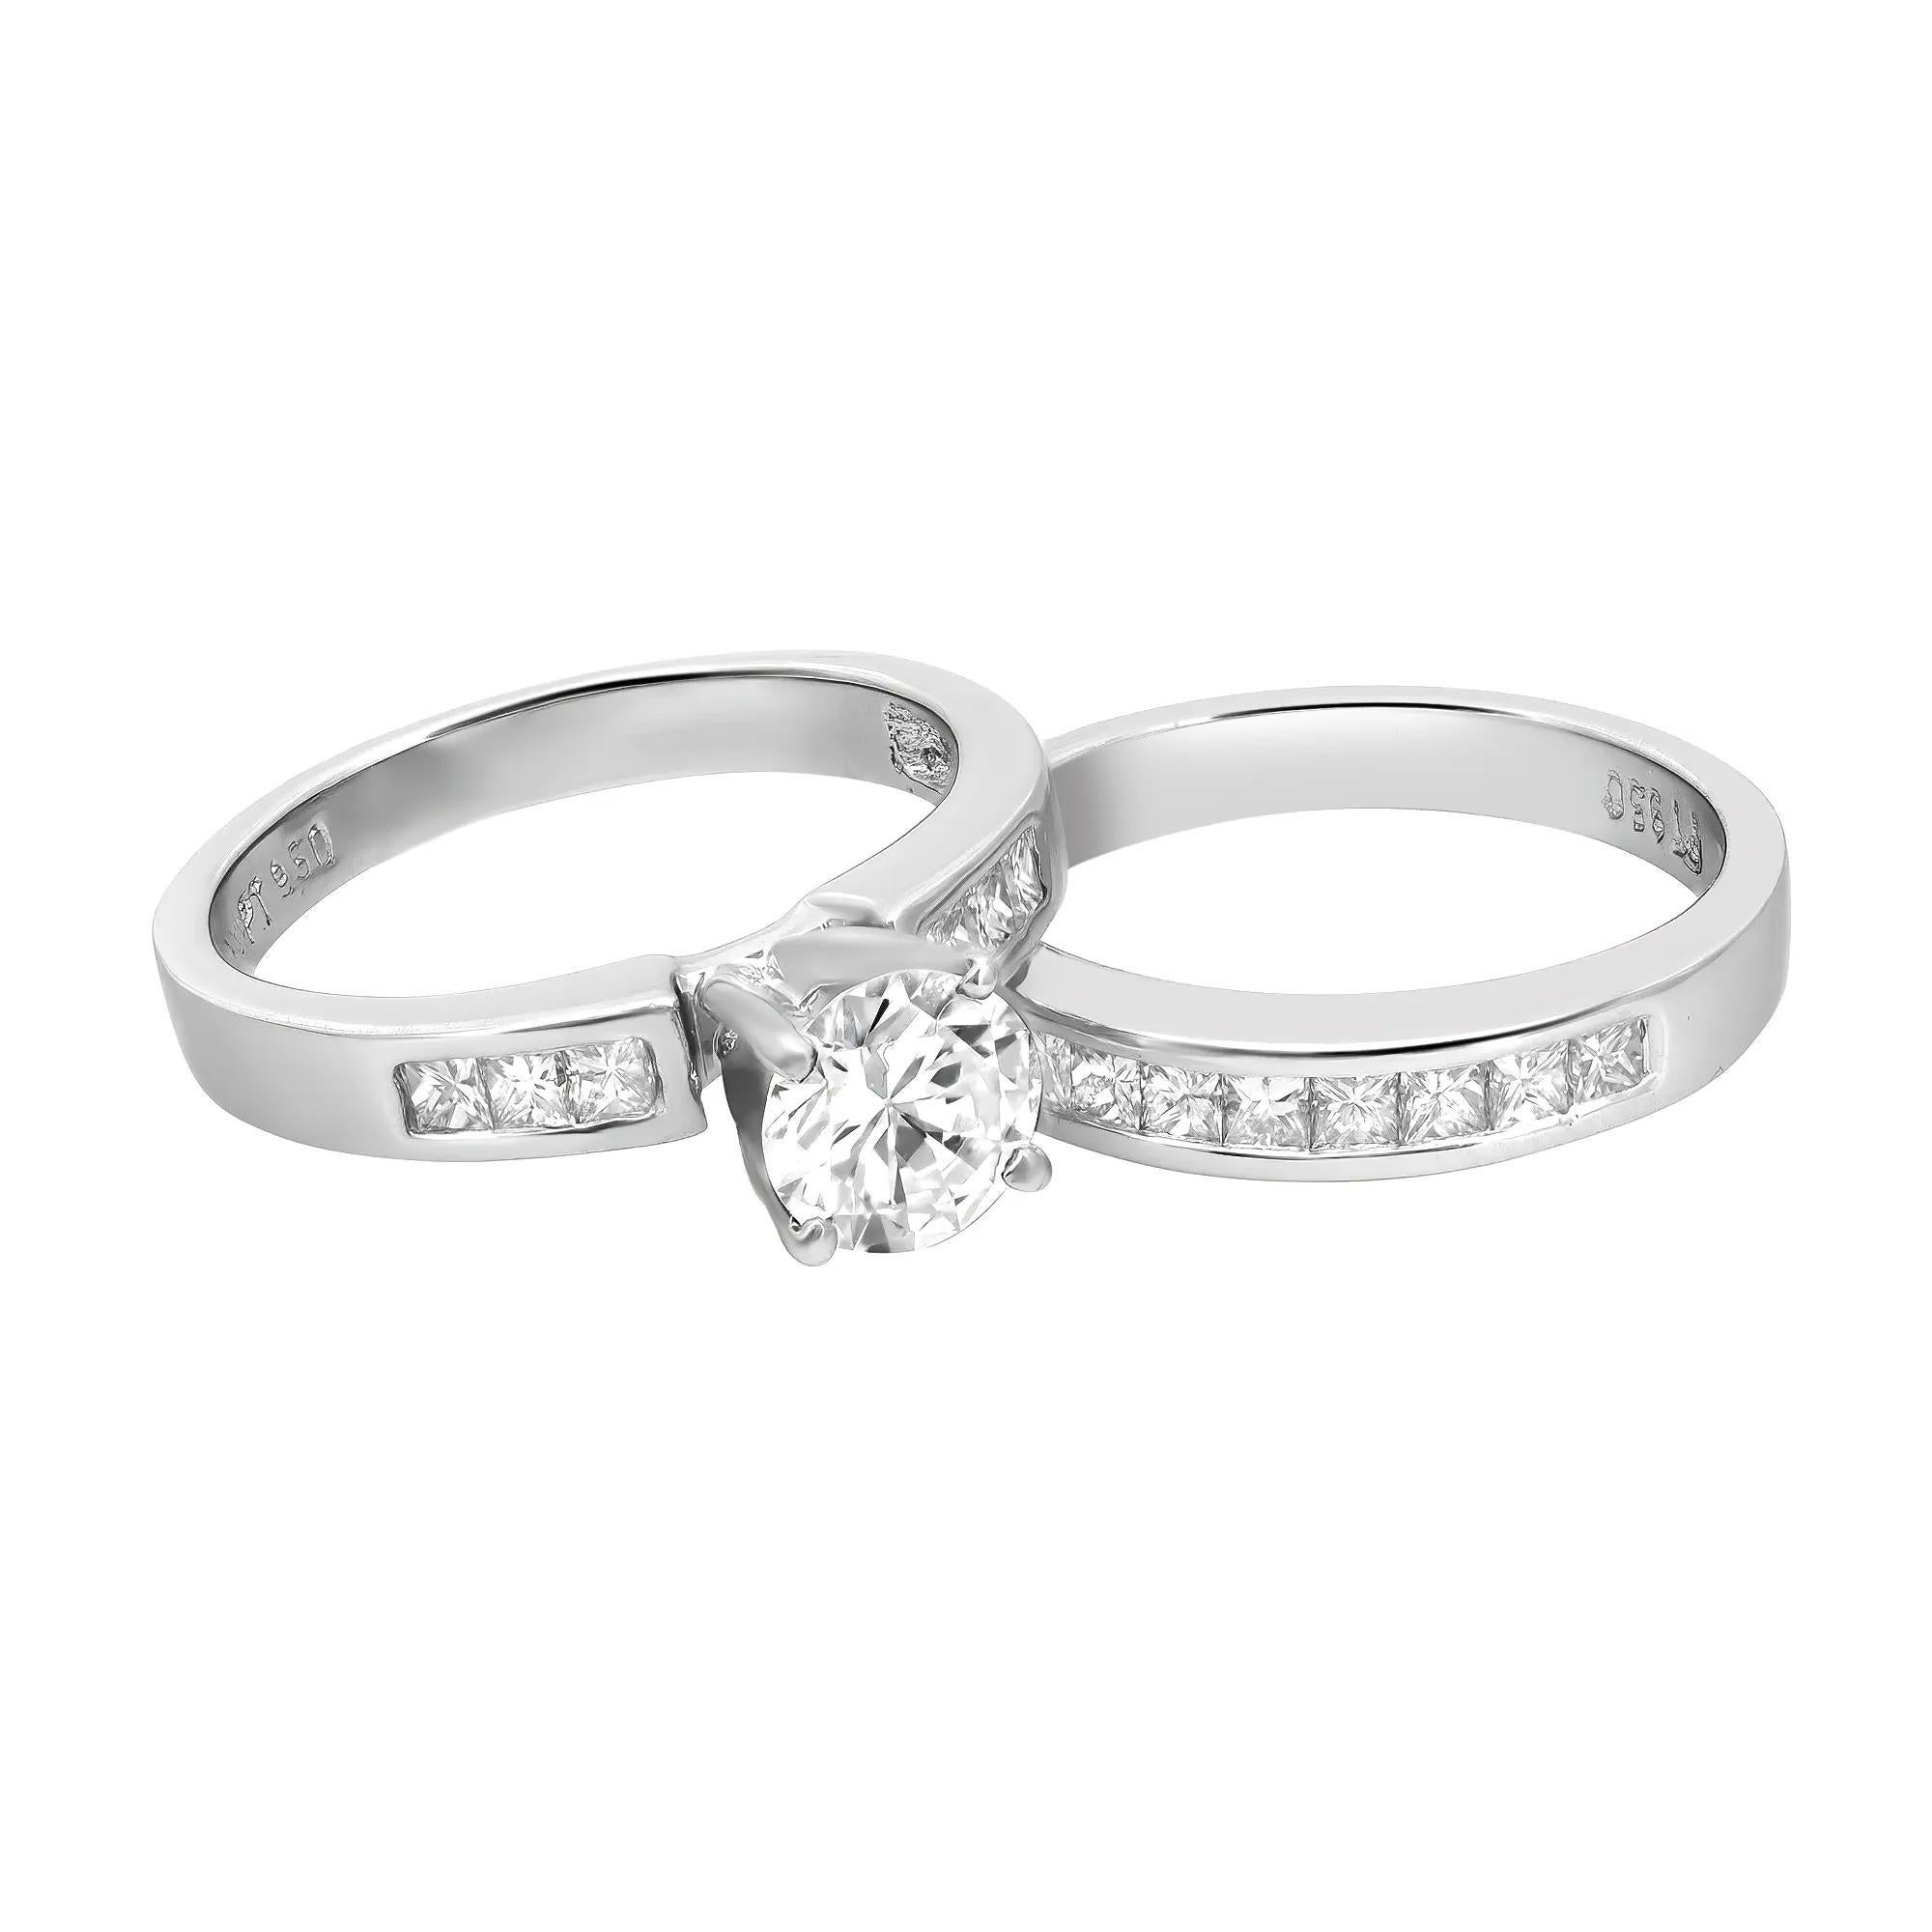 Women's GIA Certified Round Cut Diamond Engagement Ring Set Platinum 0.79Cttw Size 5.5 For Sale